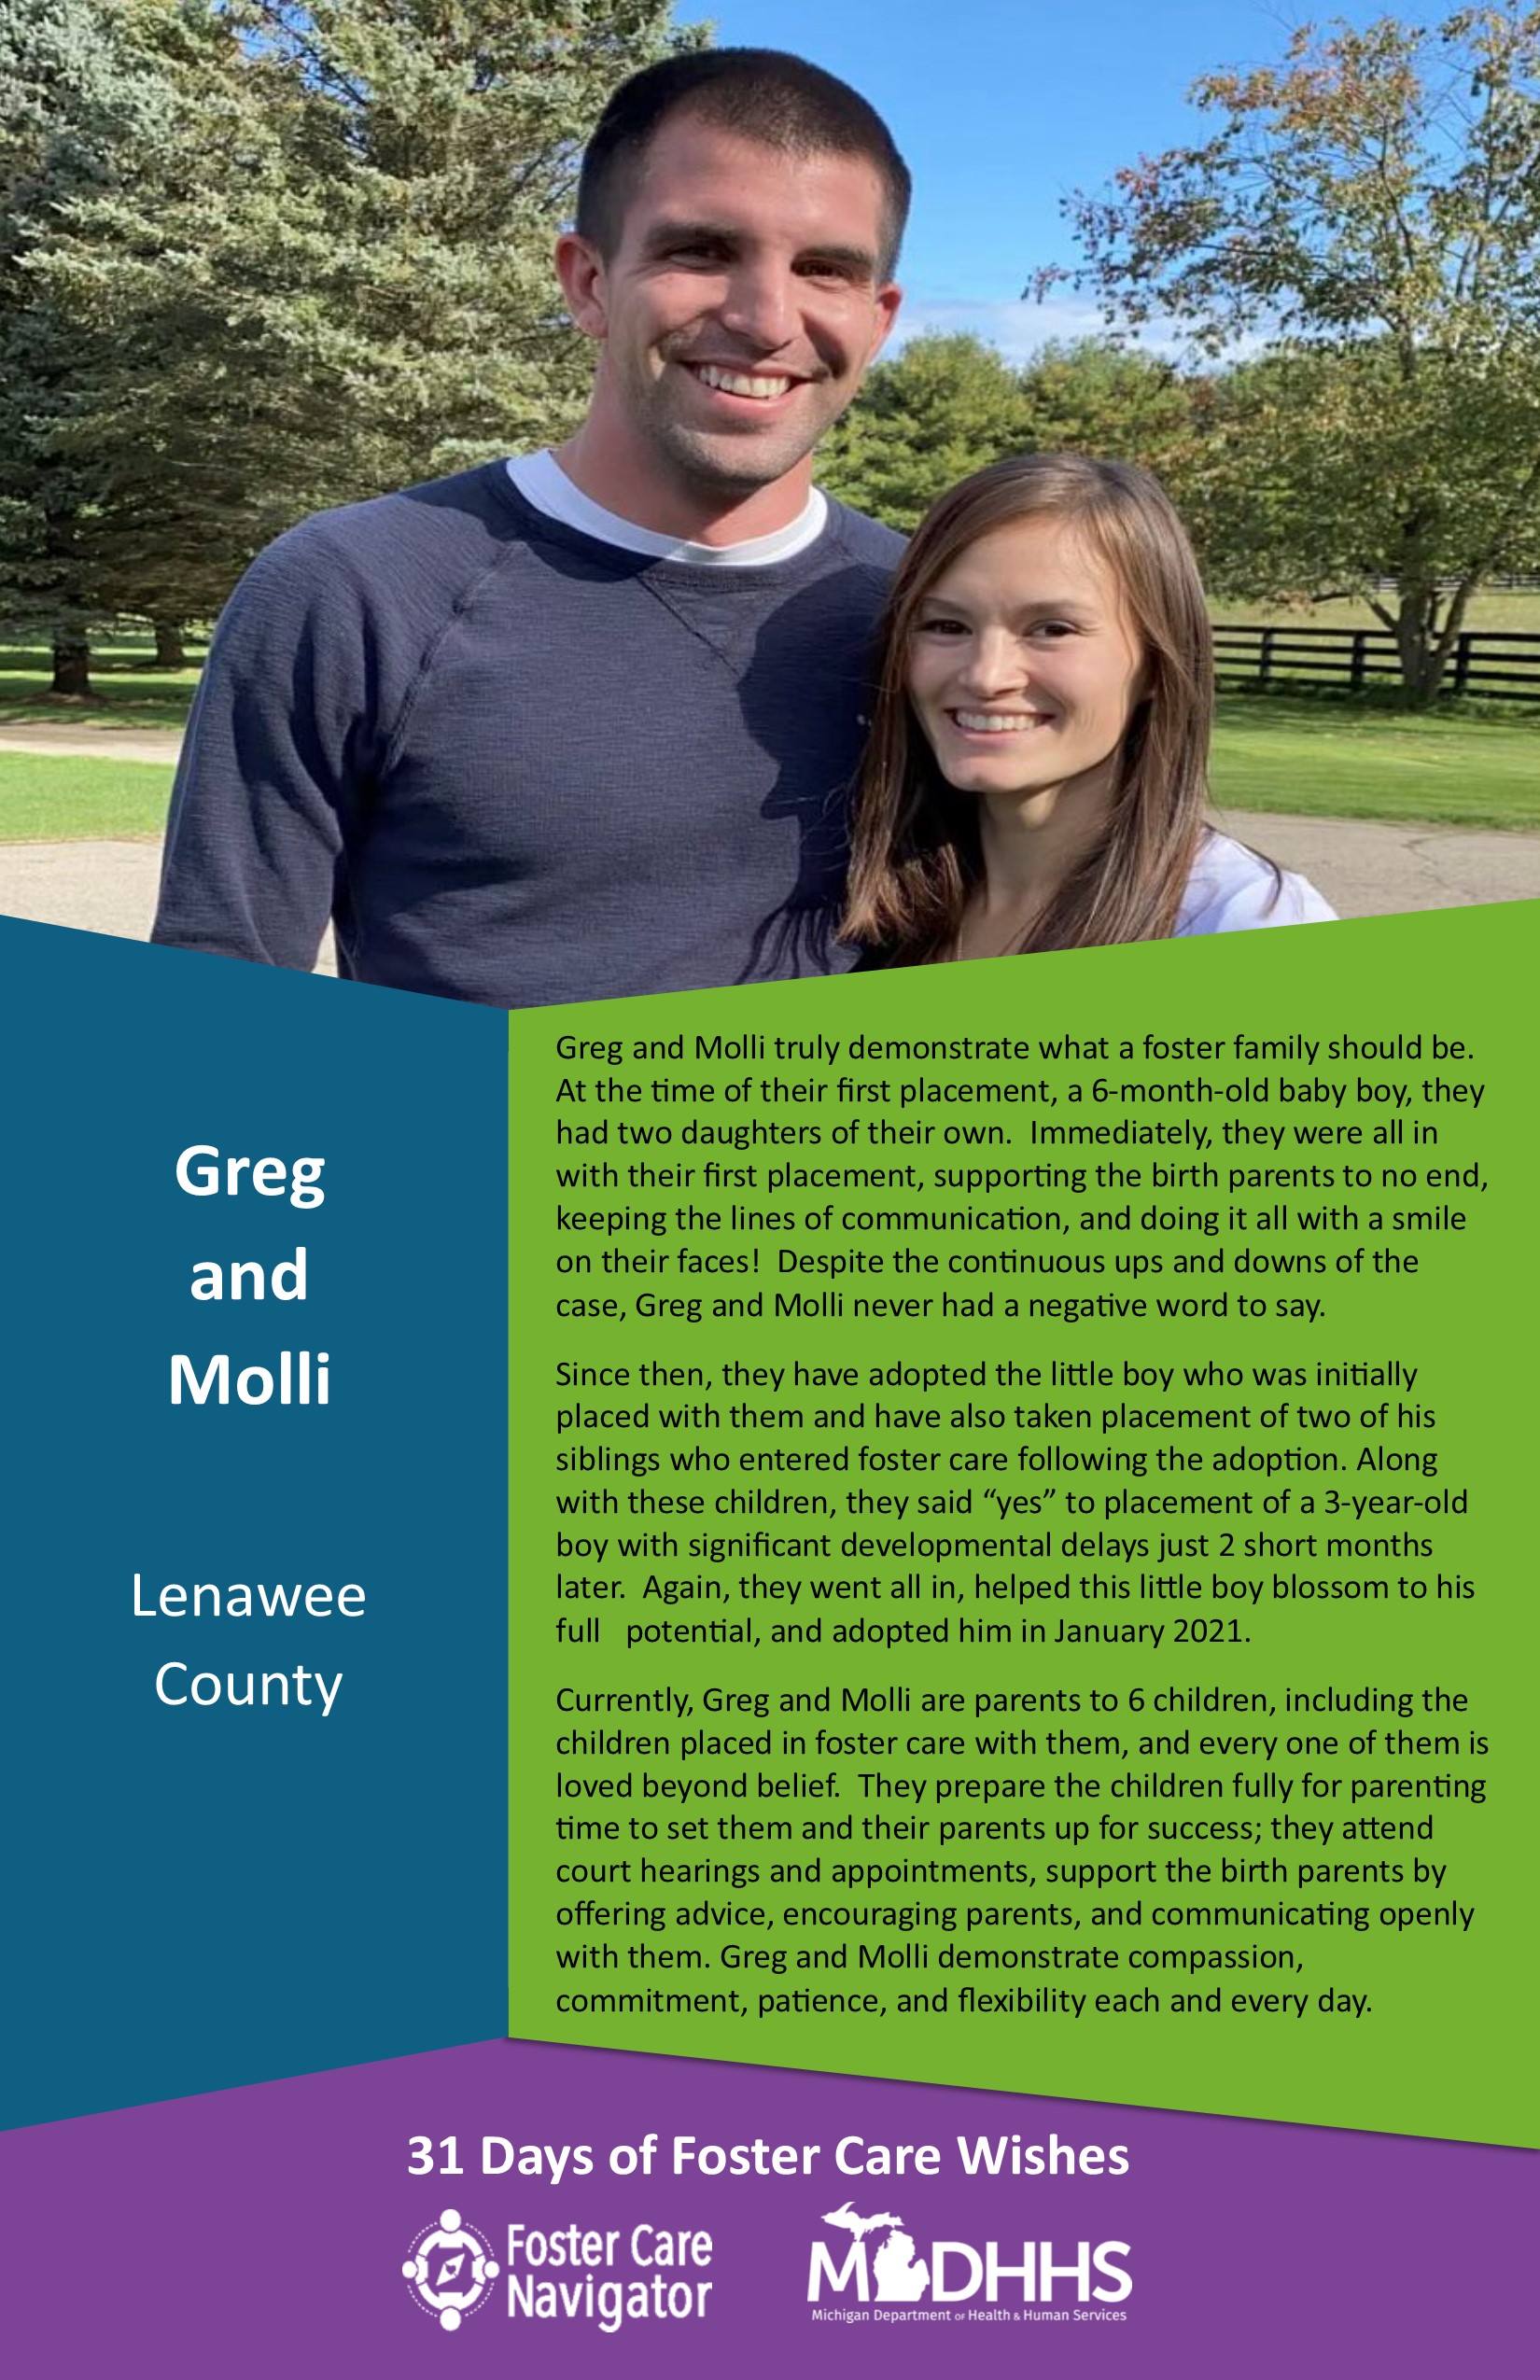 This full page feature includes all of the text listed in the body of this blog post as well as a photo of Greg and Molli. The background is blue on the left, green on the right, and purple at the bottom of the page where the logos are located.